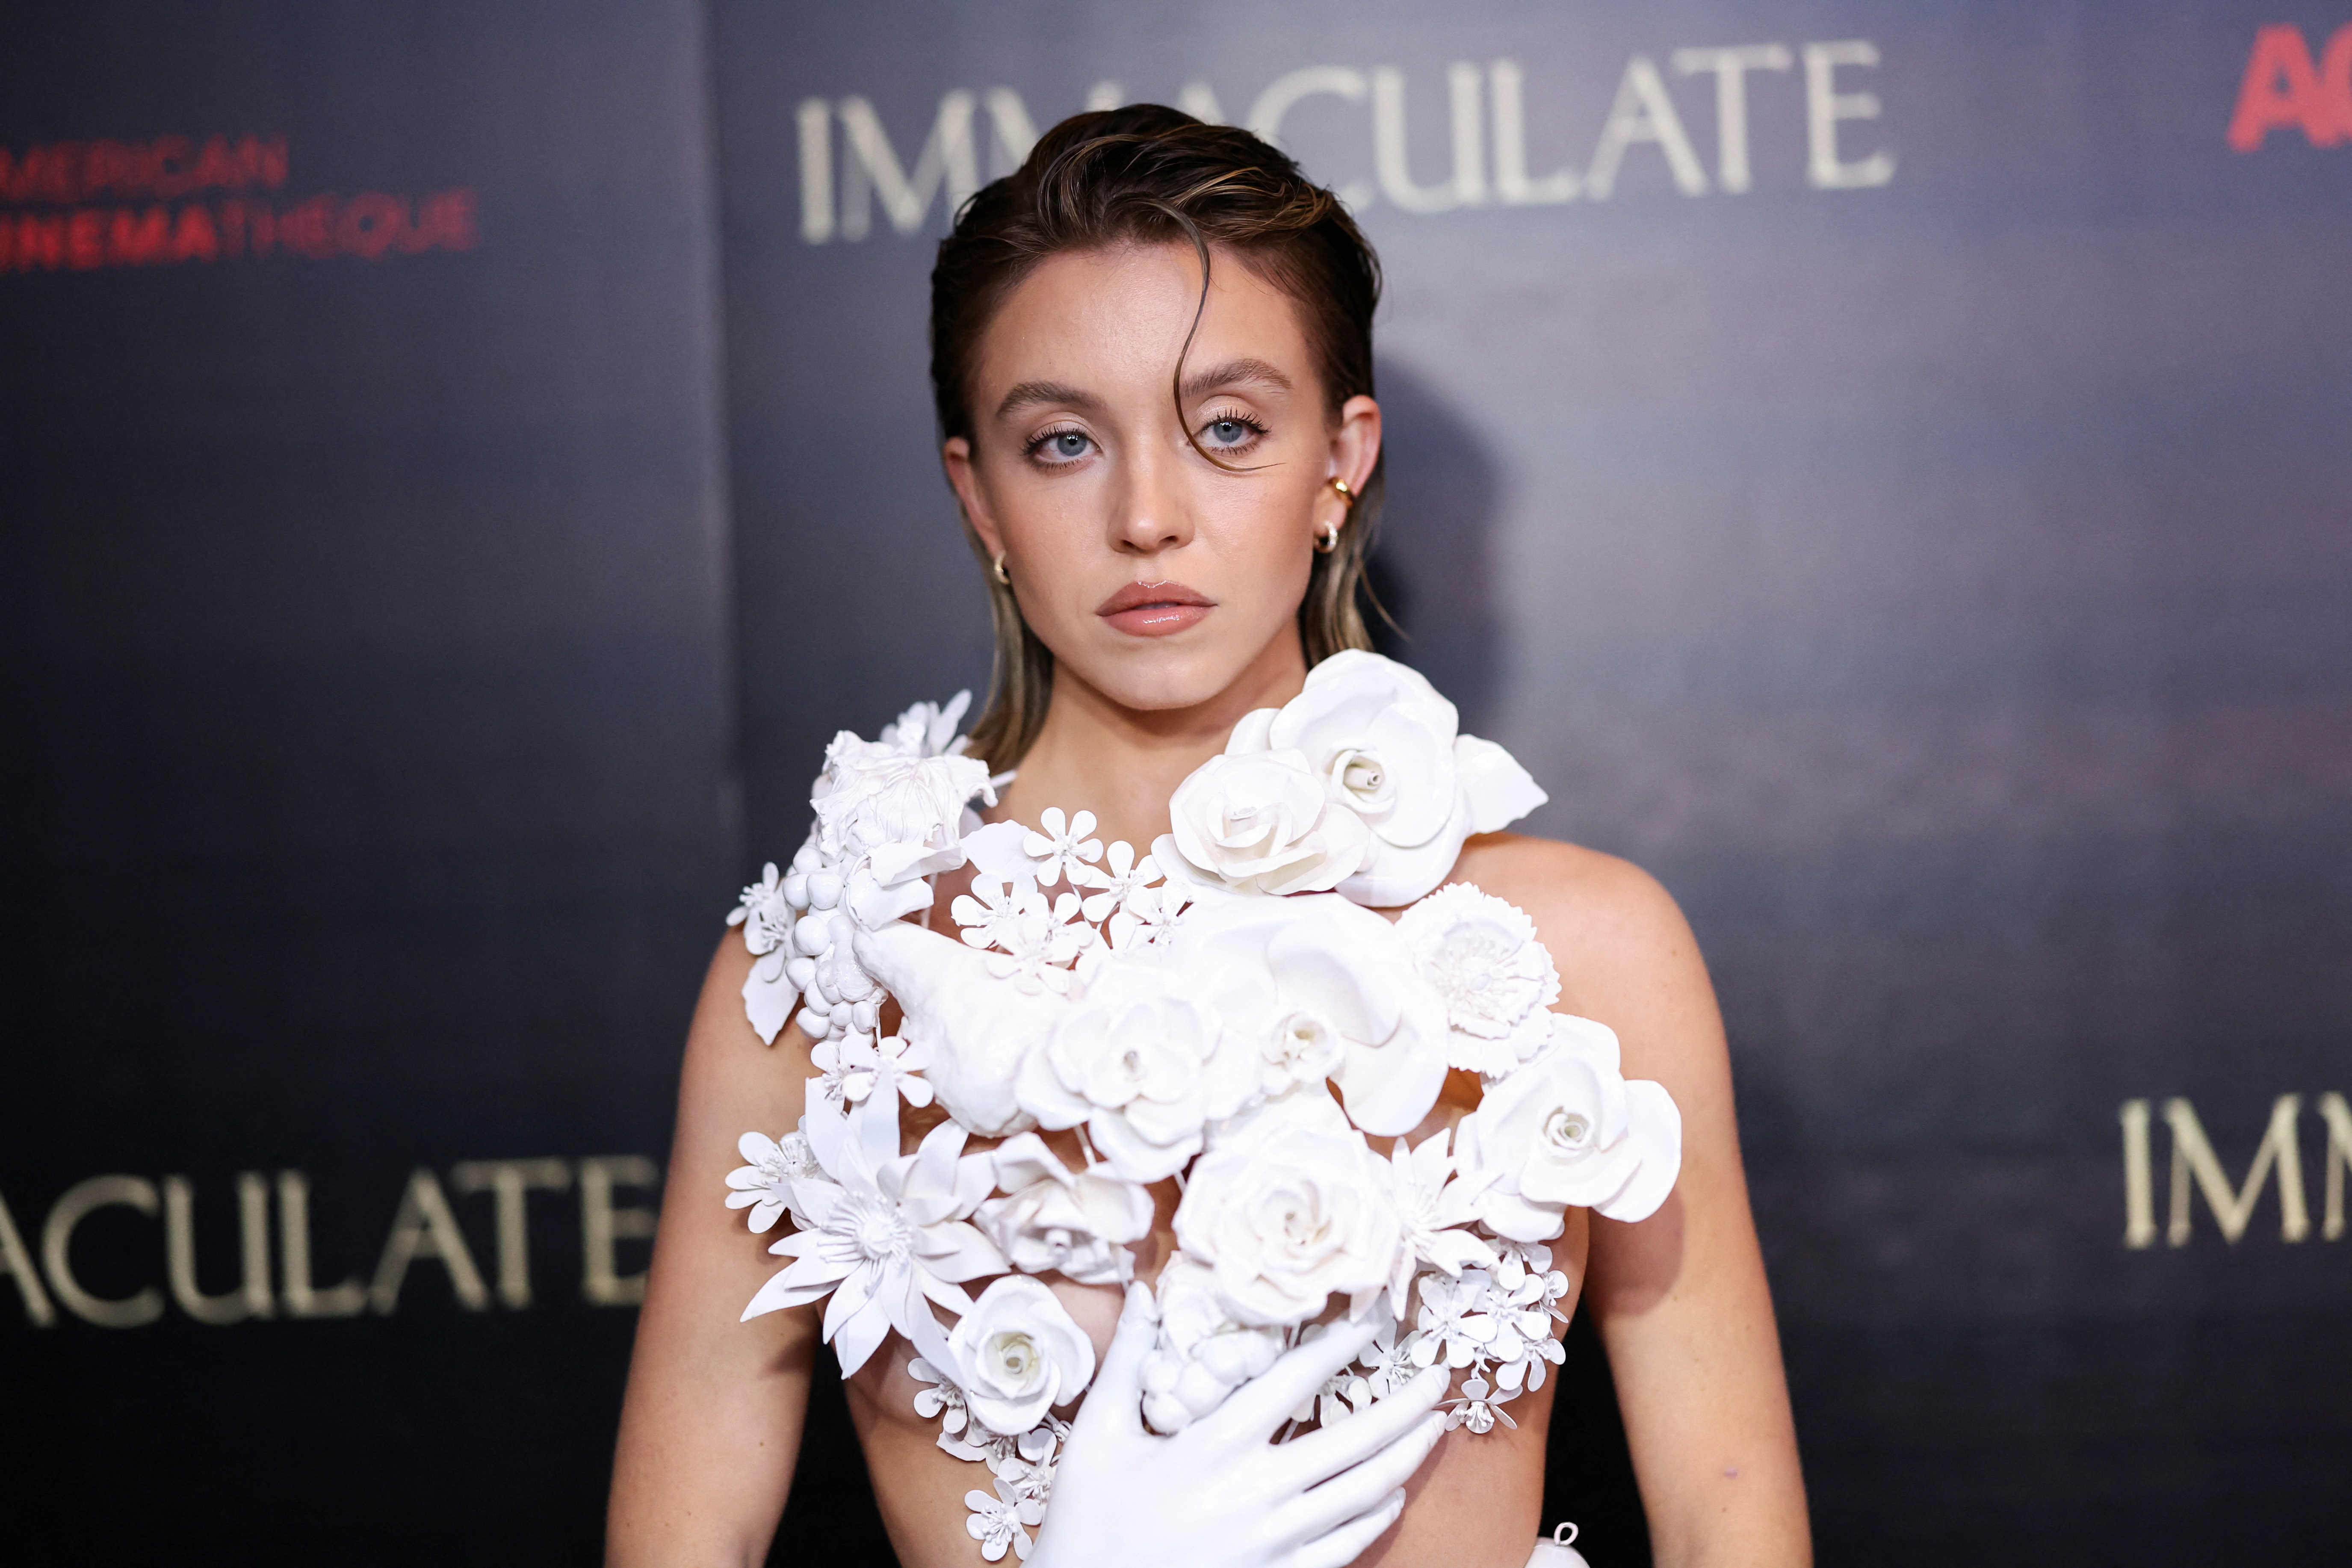 Premiere of the film "Immaculate" in Los Angeles